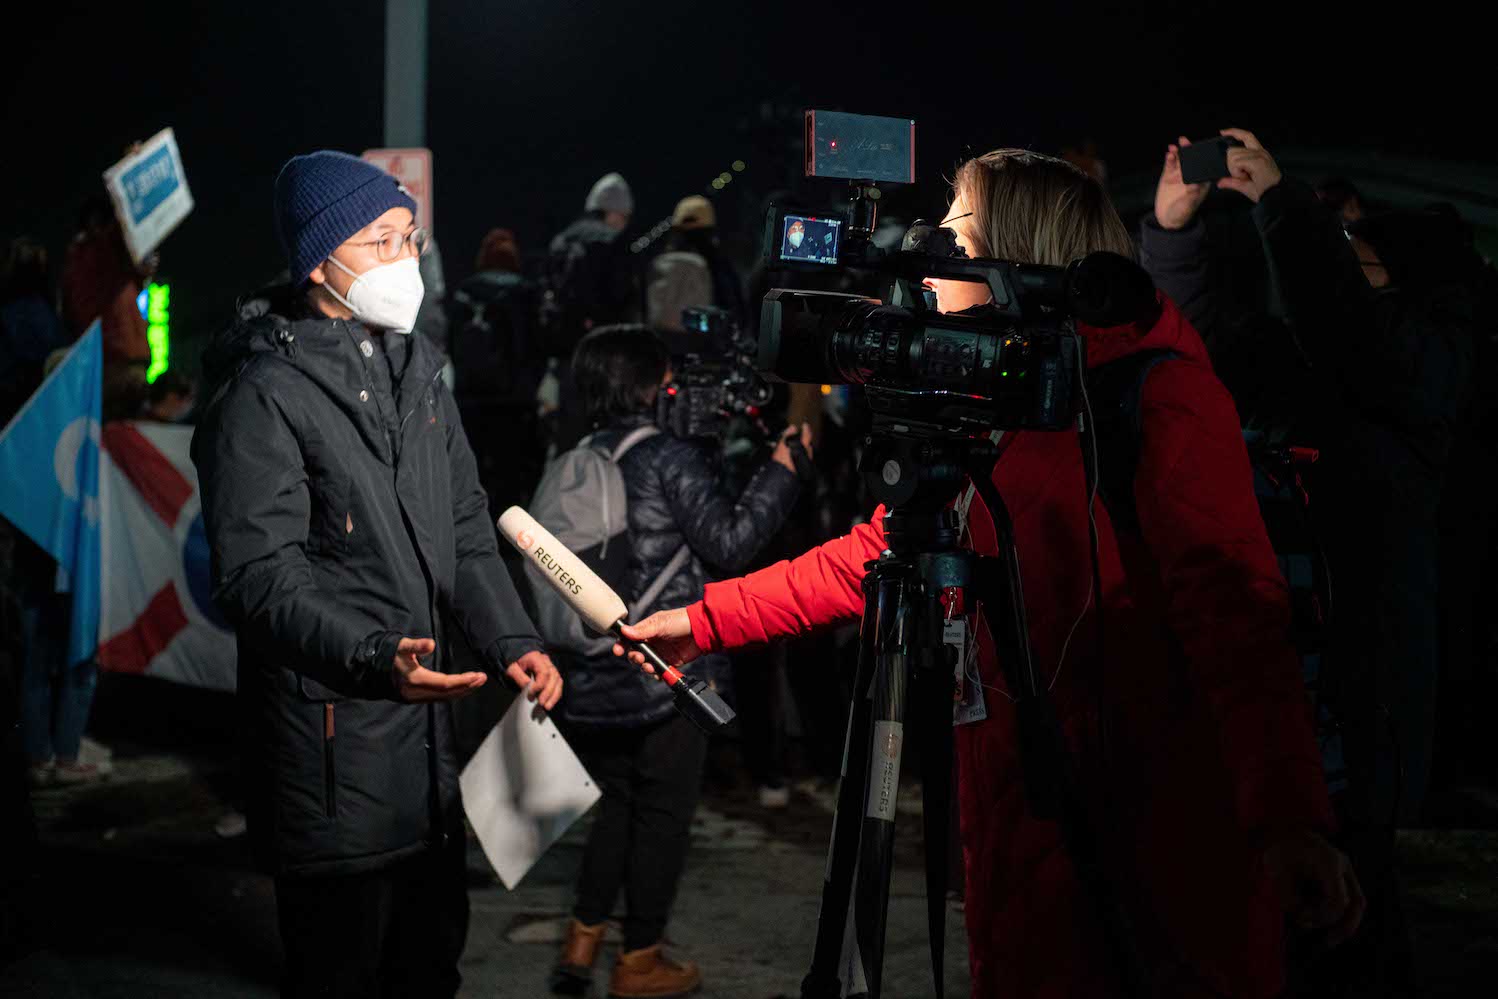 A Reuters reporter interviews a protester wearing facial masks on live television.